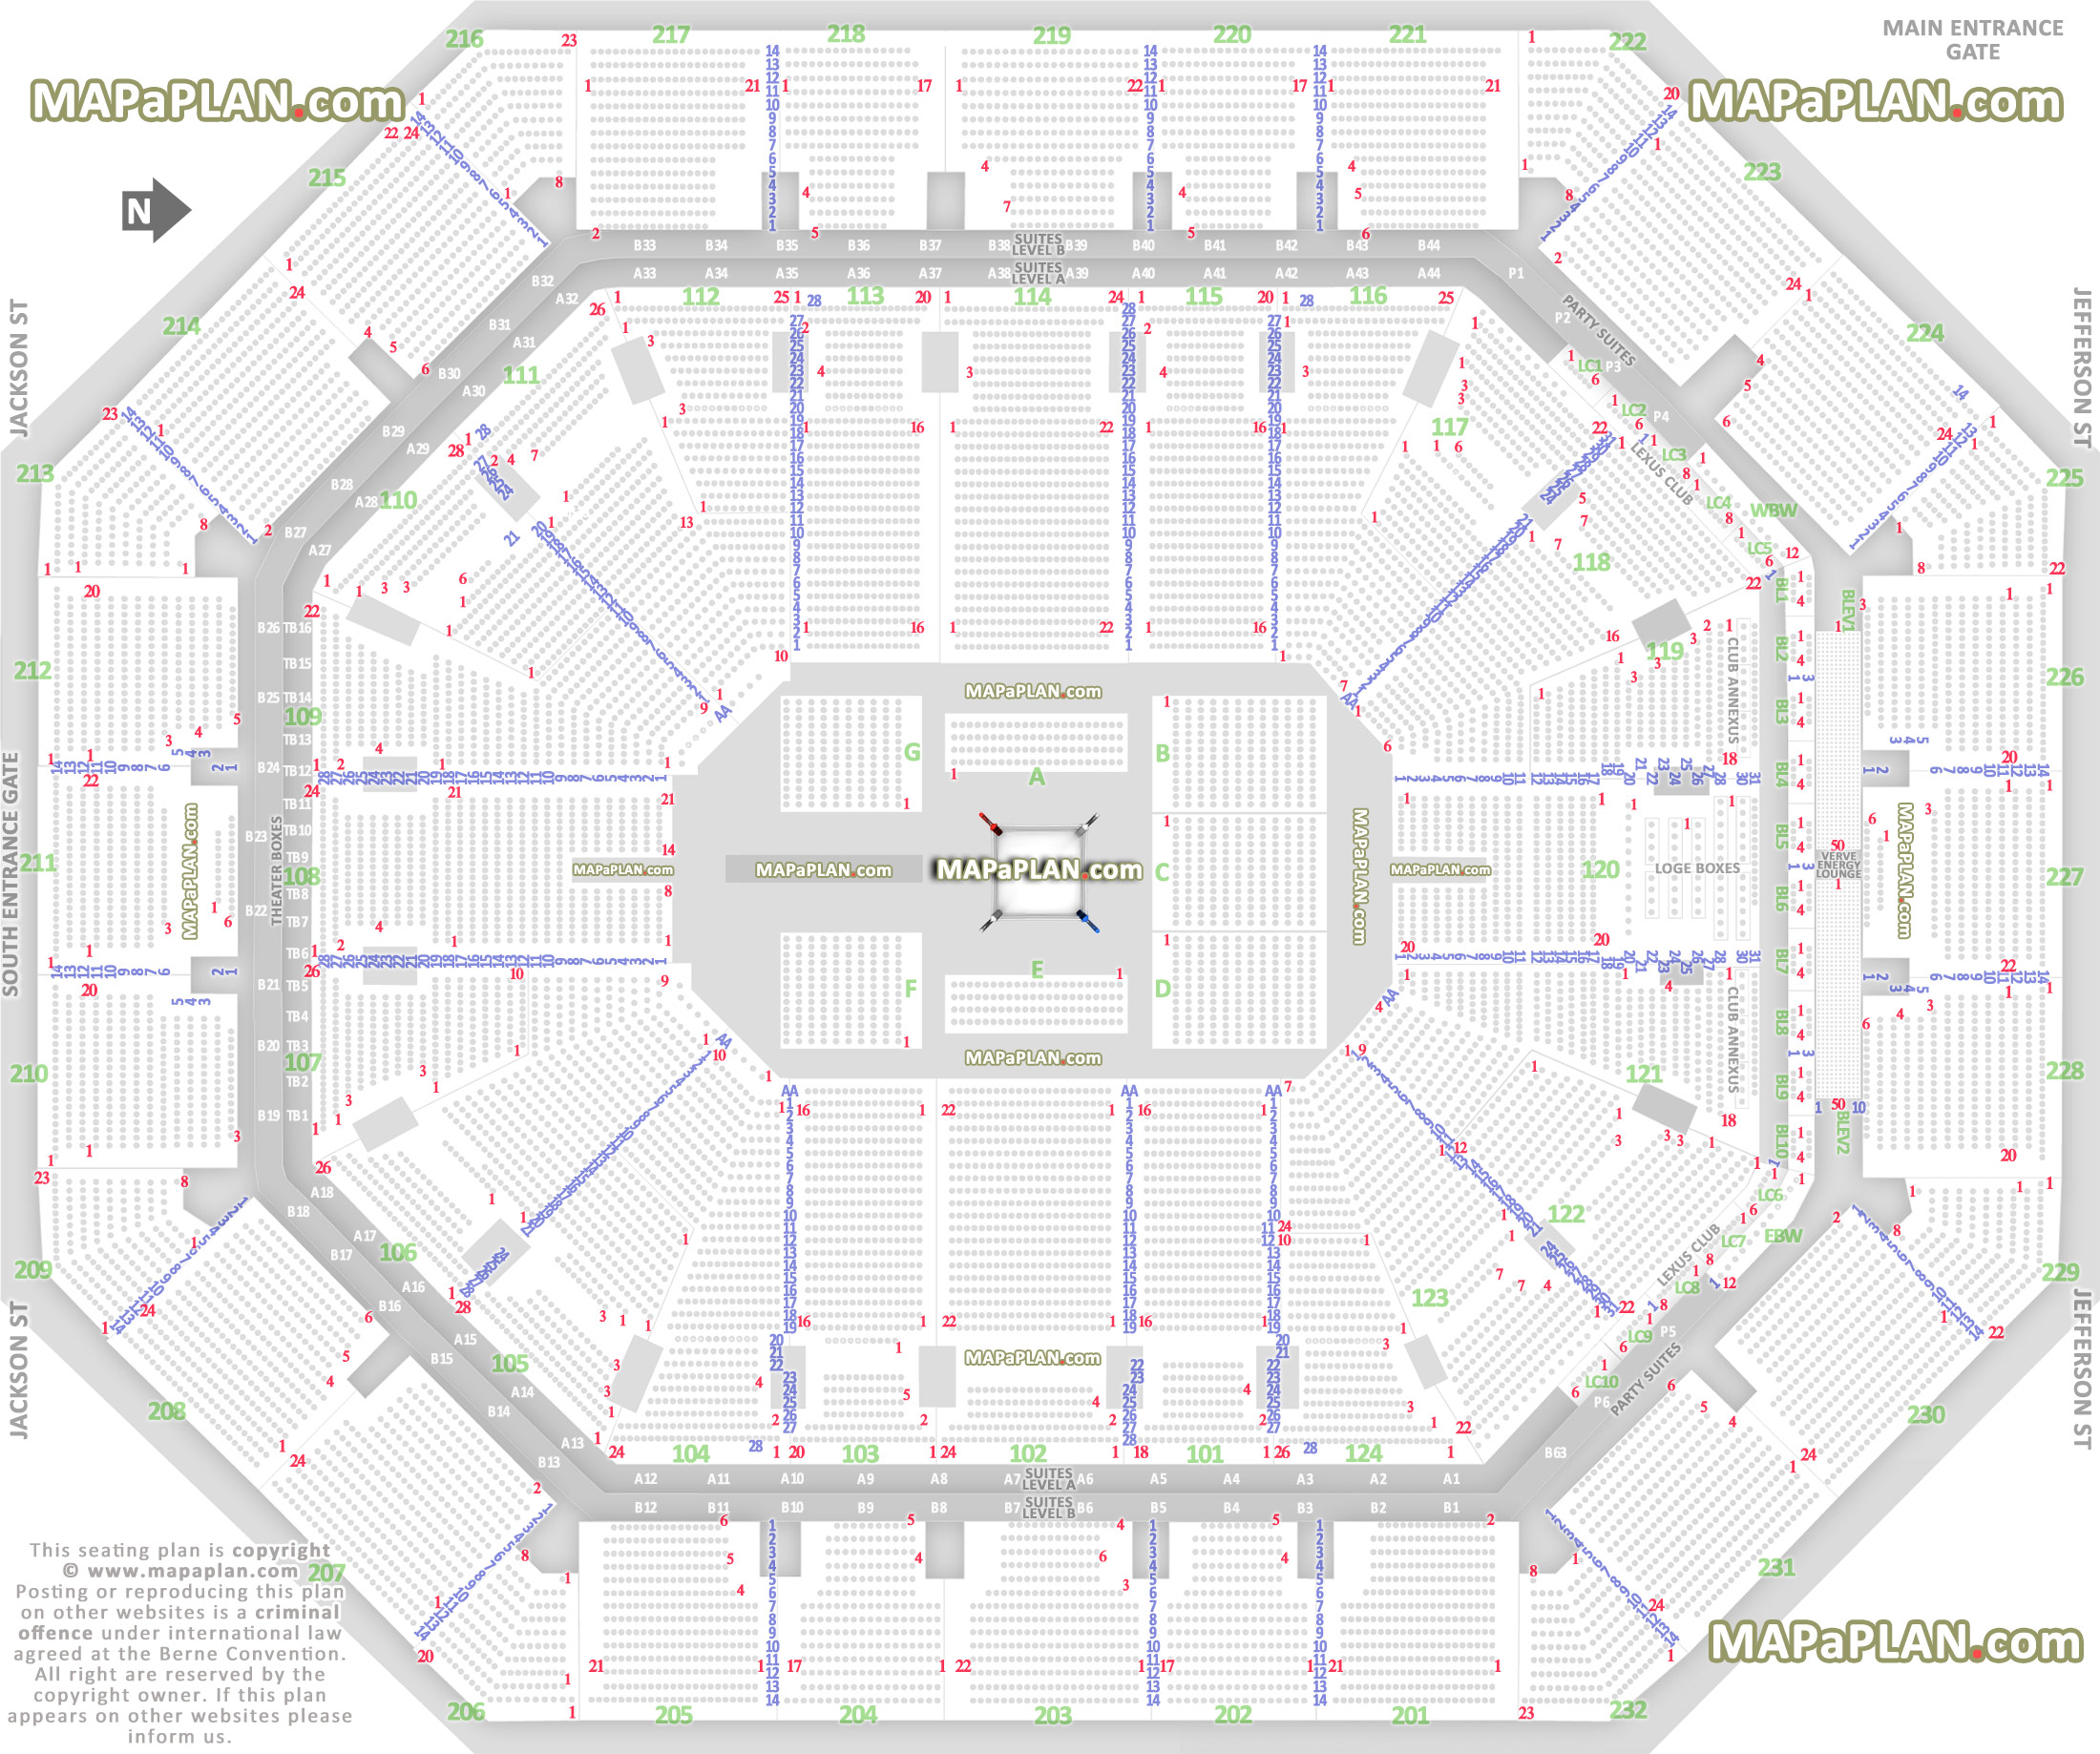 wwe raw smackdown live wrestling boxing match events 360 round ring stage configuration good bad worst side seats Phoenix Footprint Center Arena seating chart